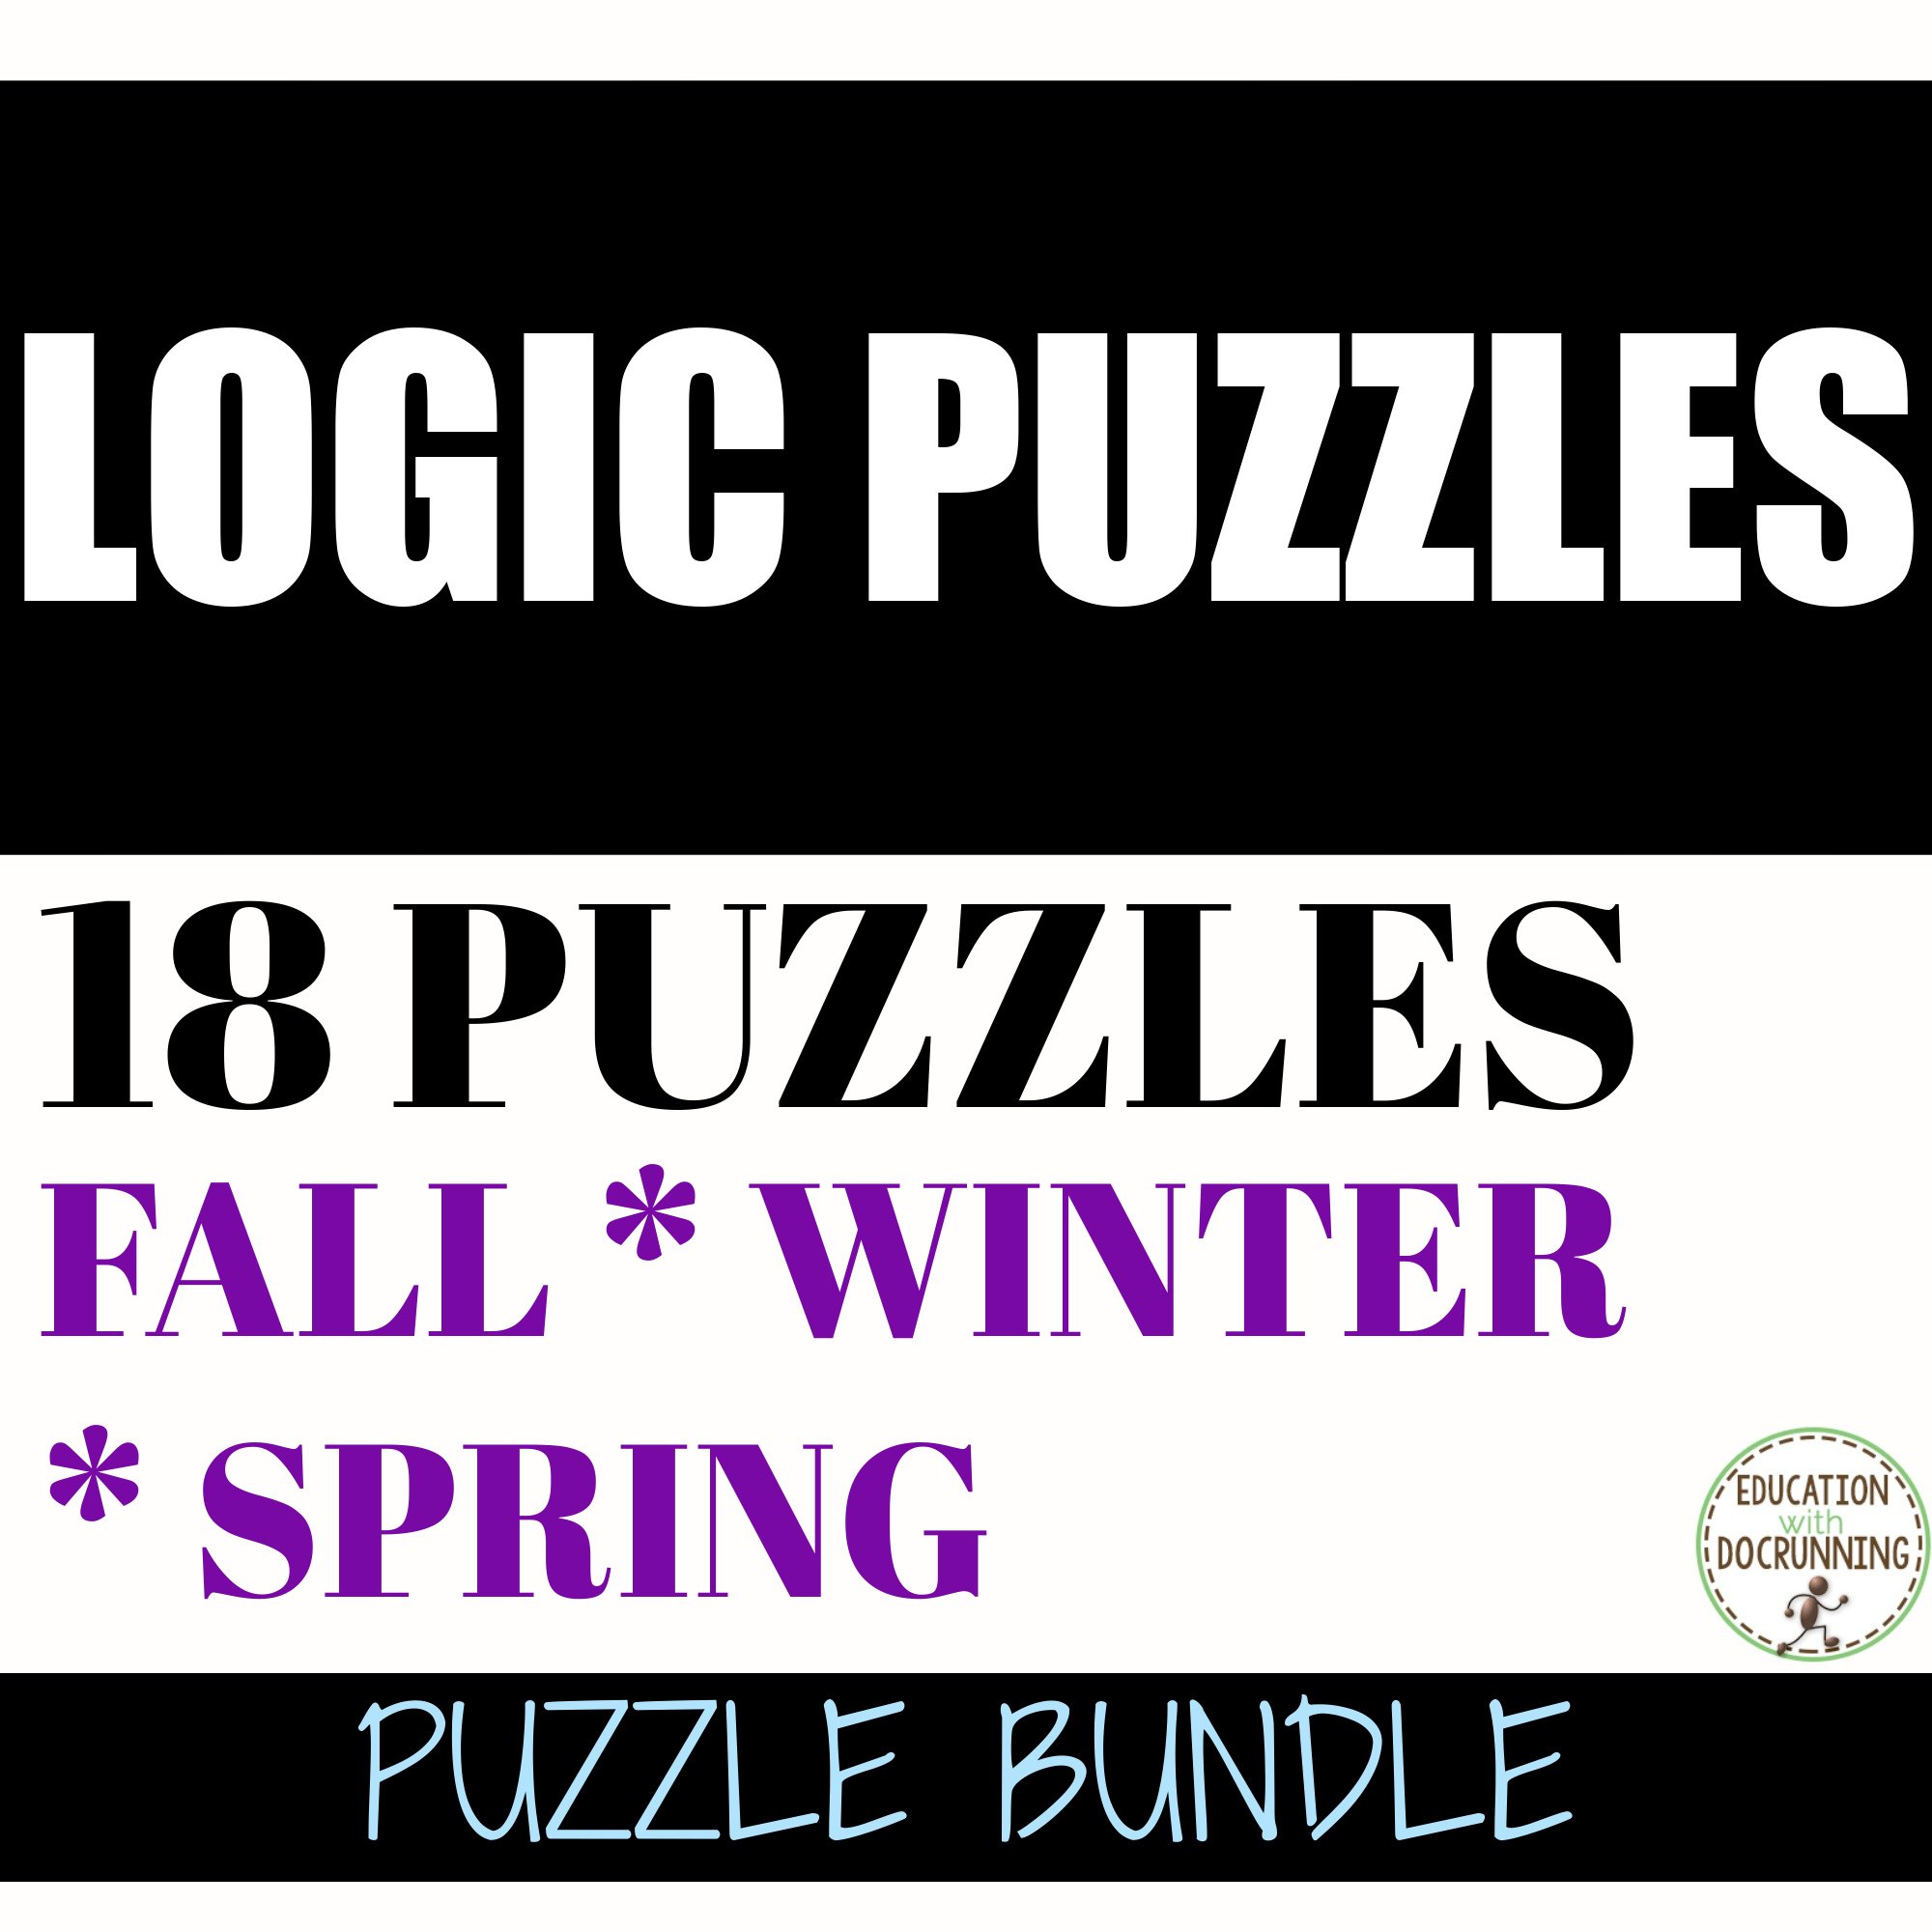 logic-puzzles-for-spring-education-with-docrunning